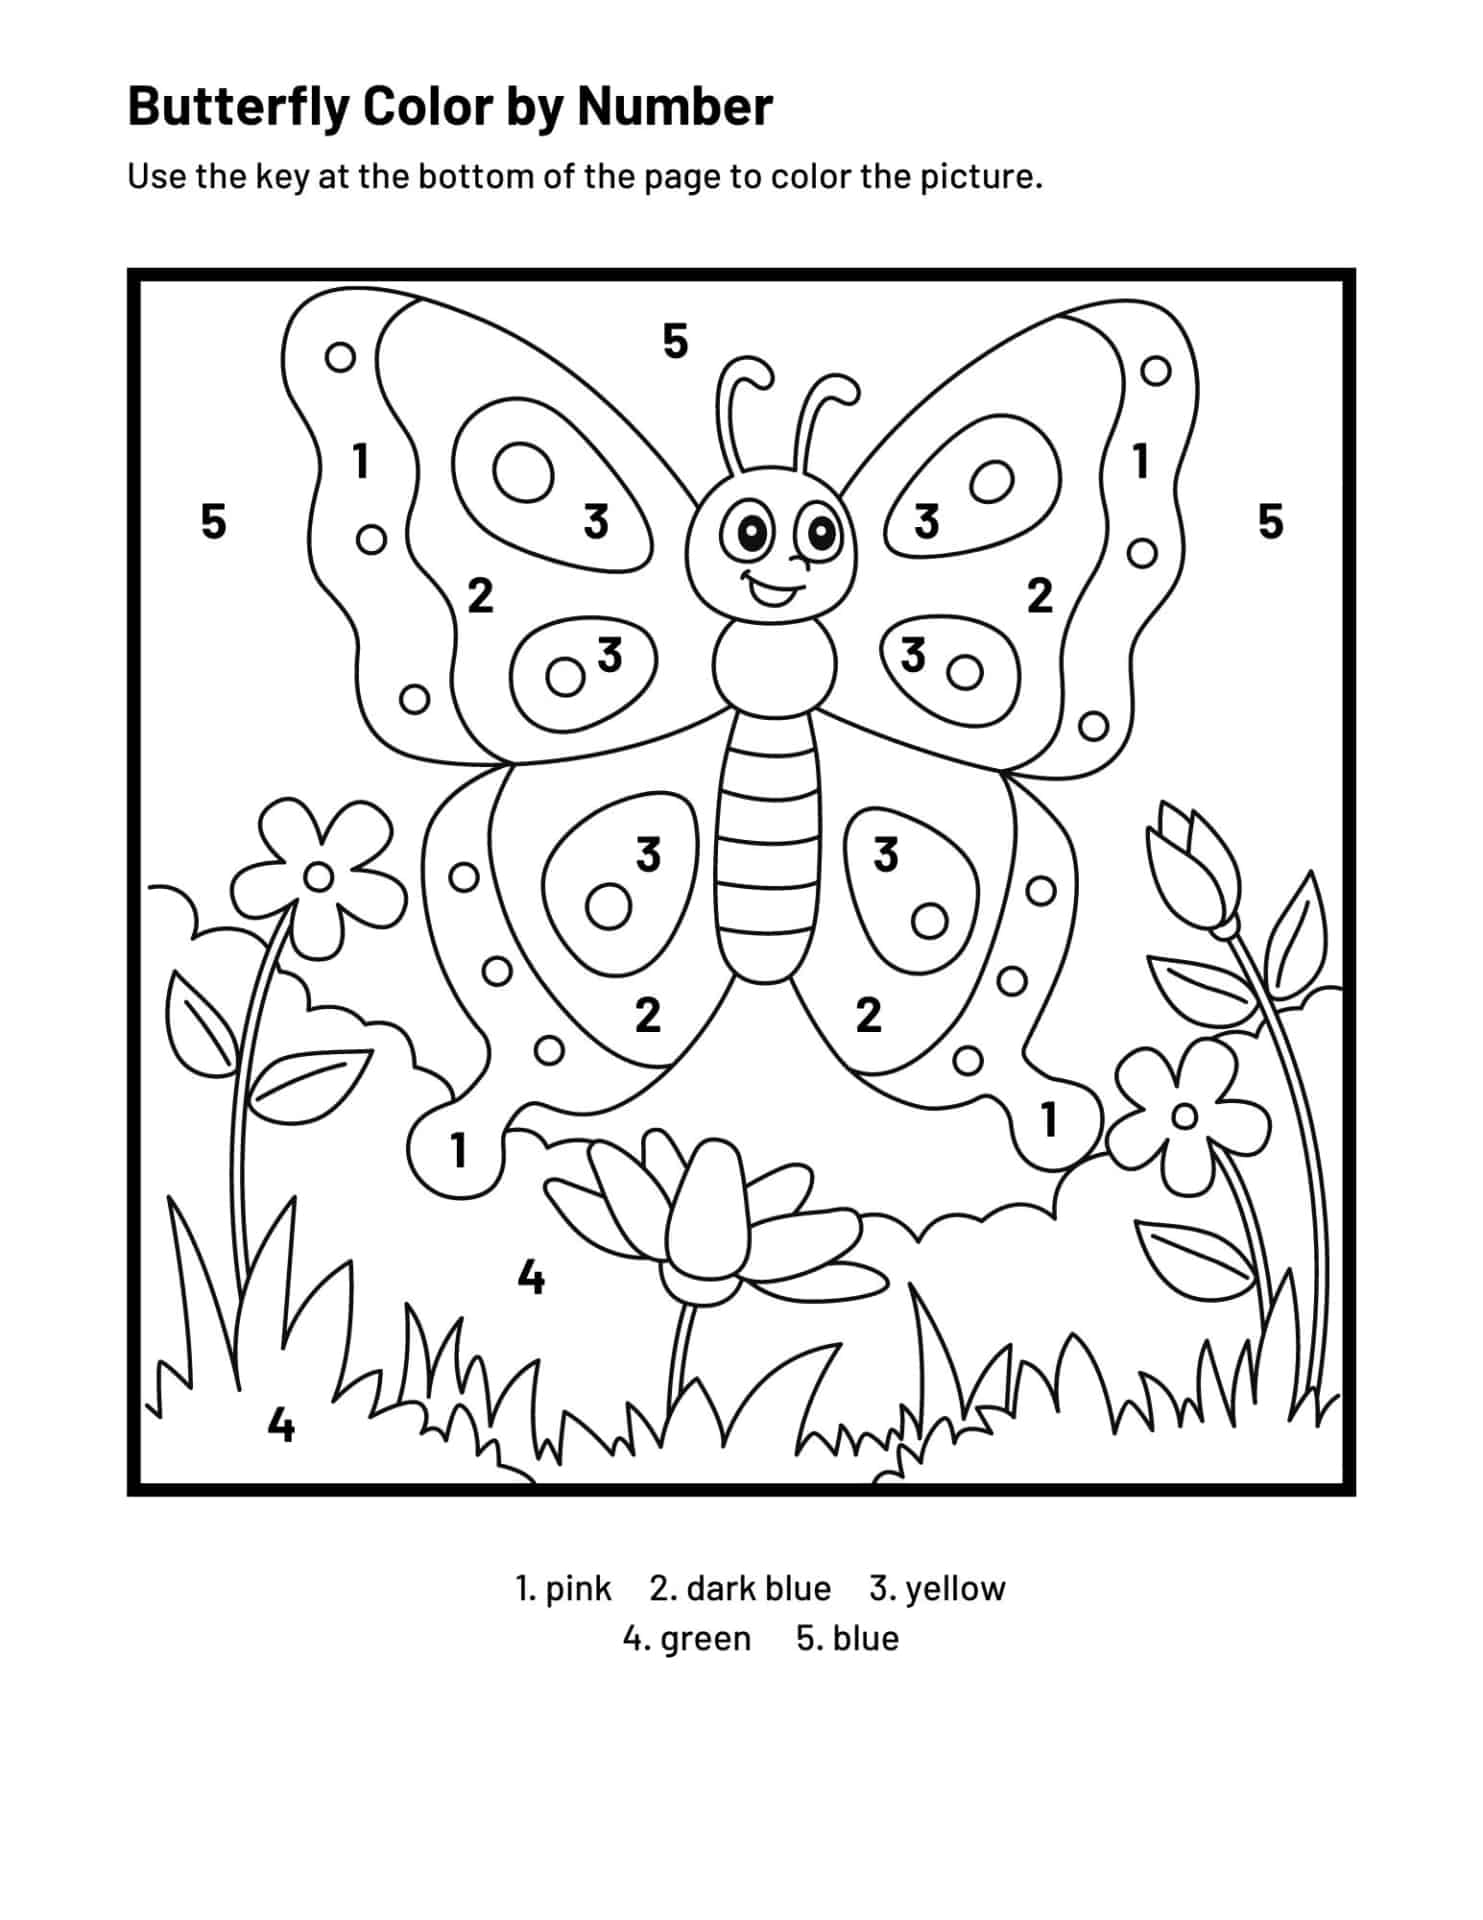 example of a printable butterfly color by number page